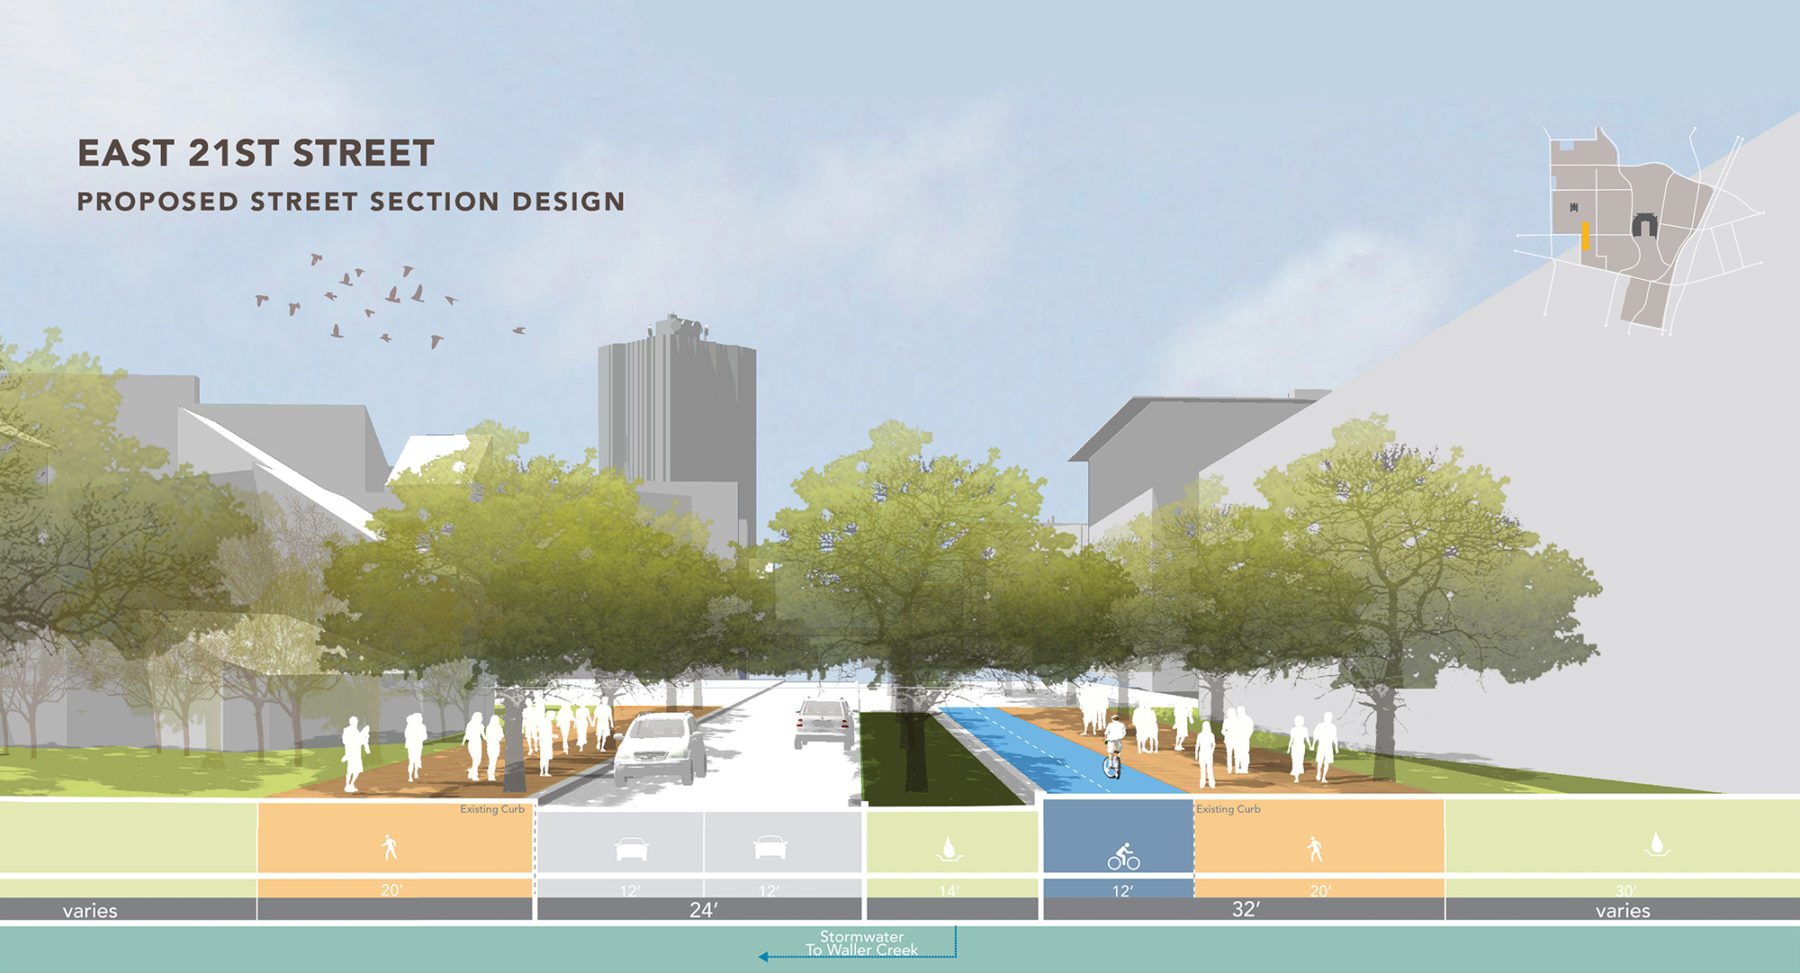 Street section of proposed design for East 21st Street